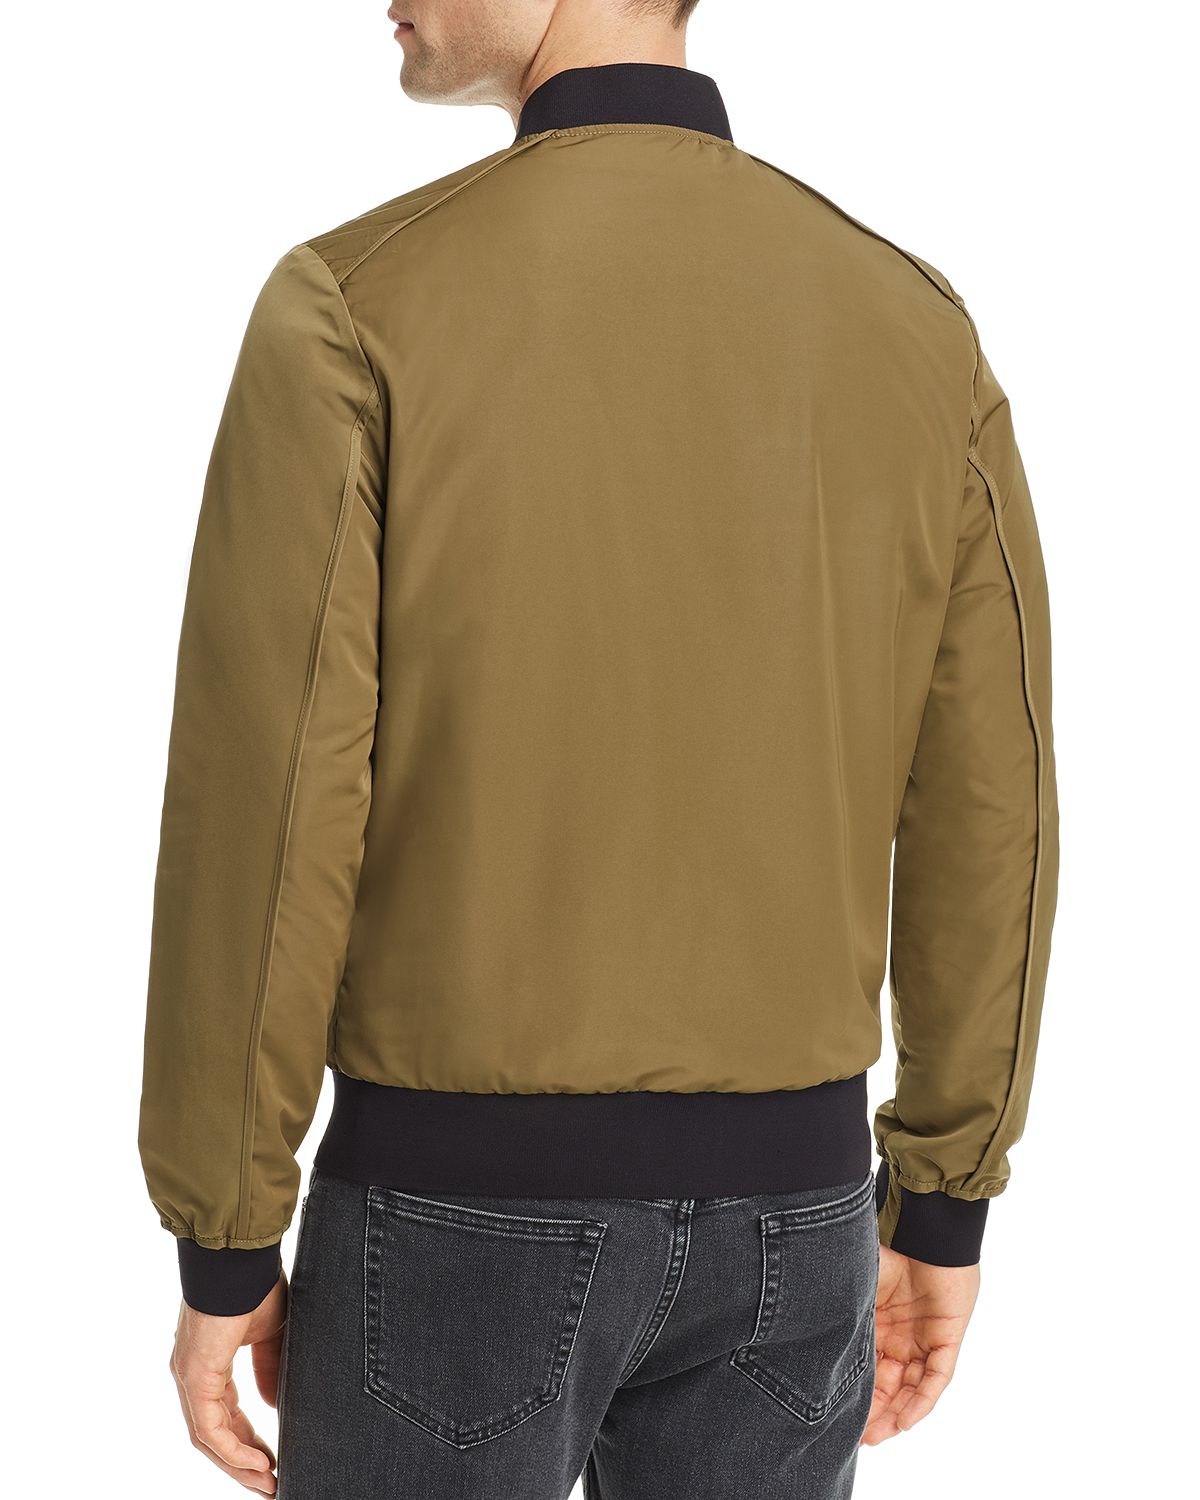 Pacific & Park Bomber Jacket Olive